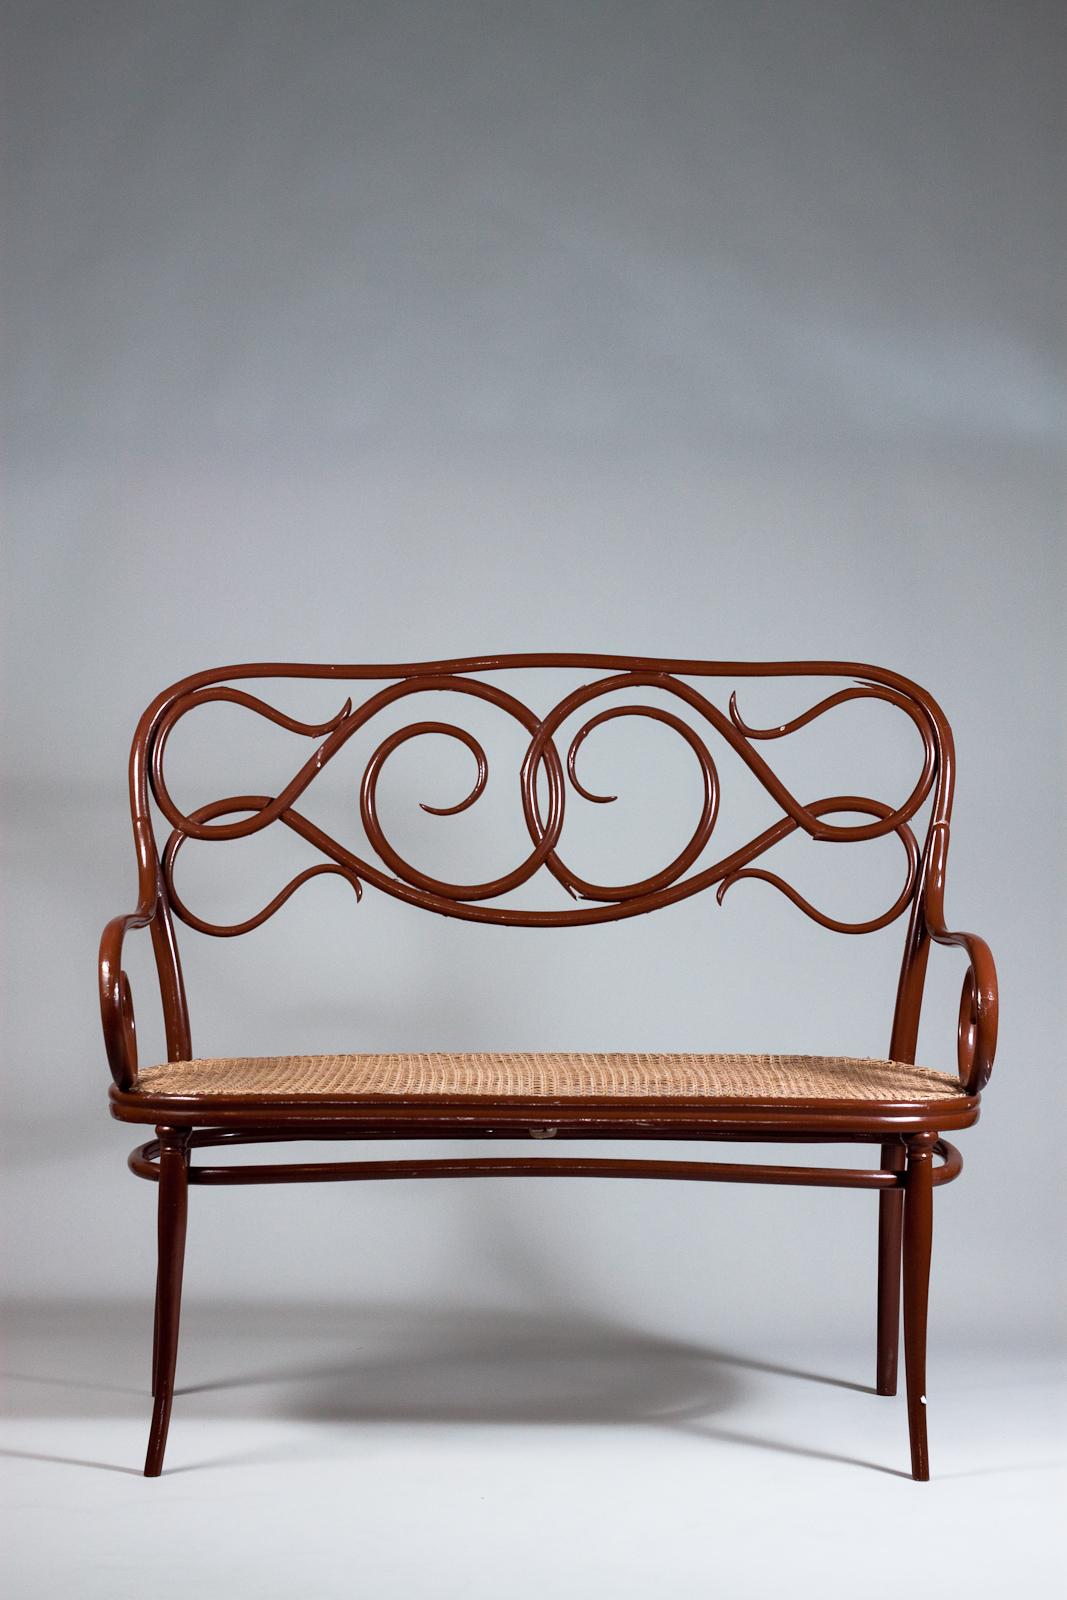 Painted Antique Thonet No. 2 Bentwood Sofa , late 19th century